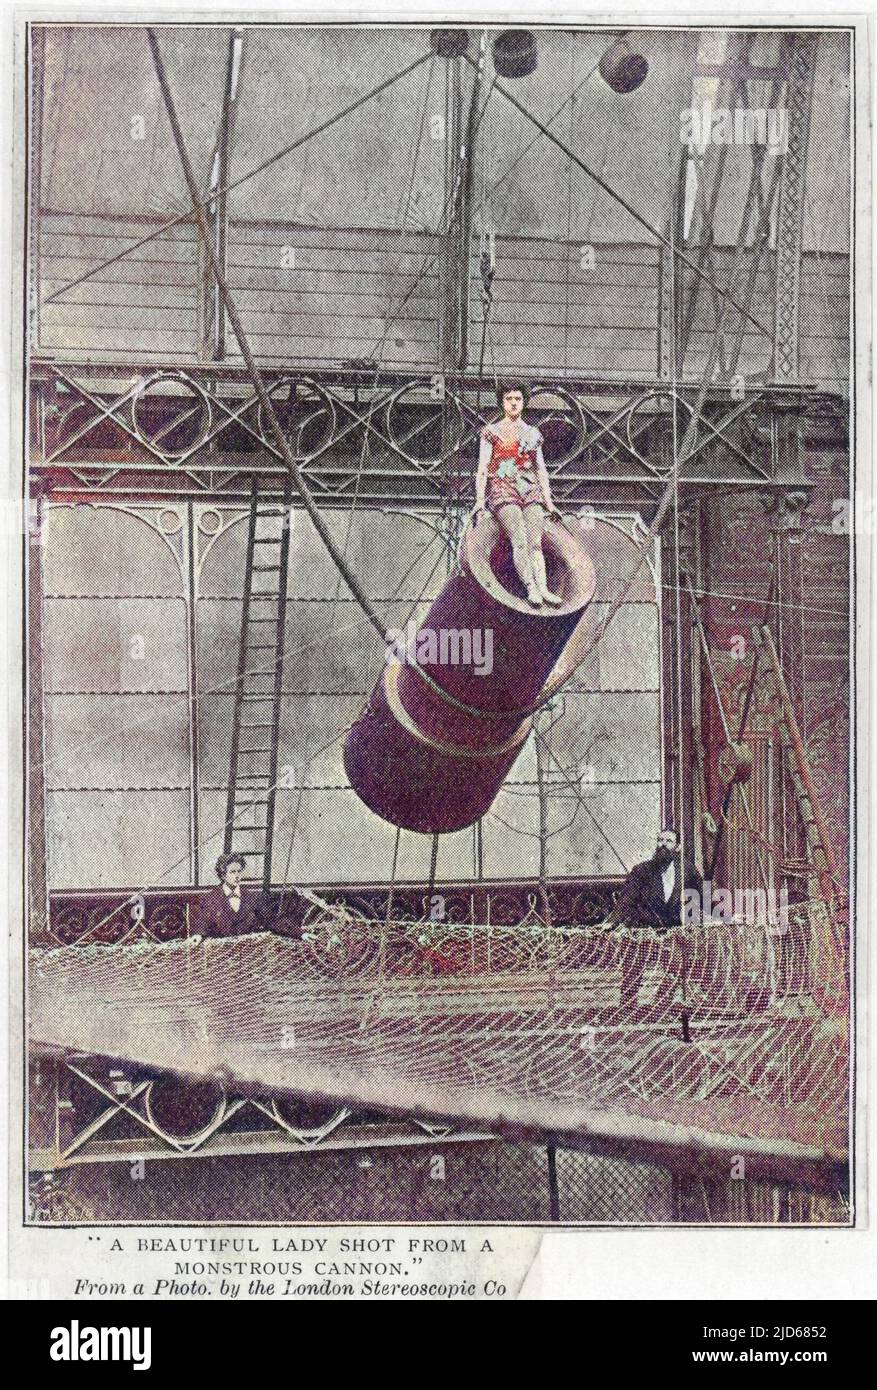 Zazel at the Royal Aquarium, London. 'A beautiful Lady shot from a monstrous cannon.' After a theatrical pause, the 'fuse' is lit, and Zazel shoots forth 35 feet from the spring loaded wooden cannon, landing in the ample safety net below. This is thought to be the earliest photograph of a human cannonball act. Colourised version of : 10062172       Date: 1877 Stock Photo